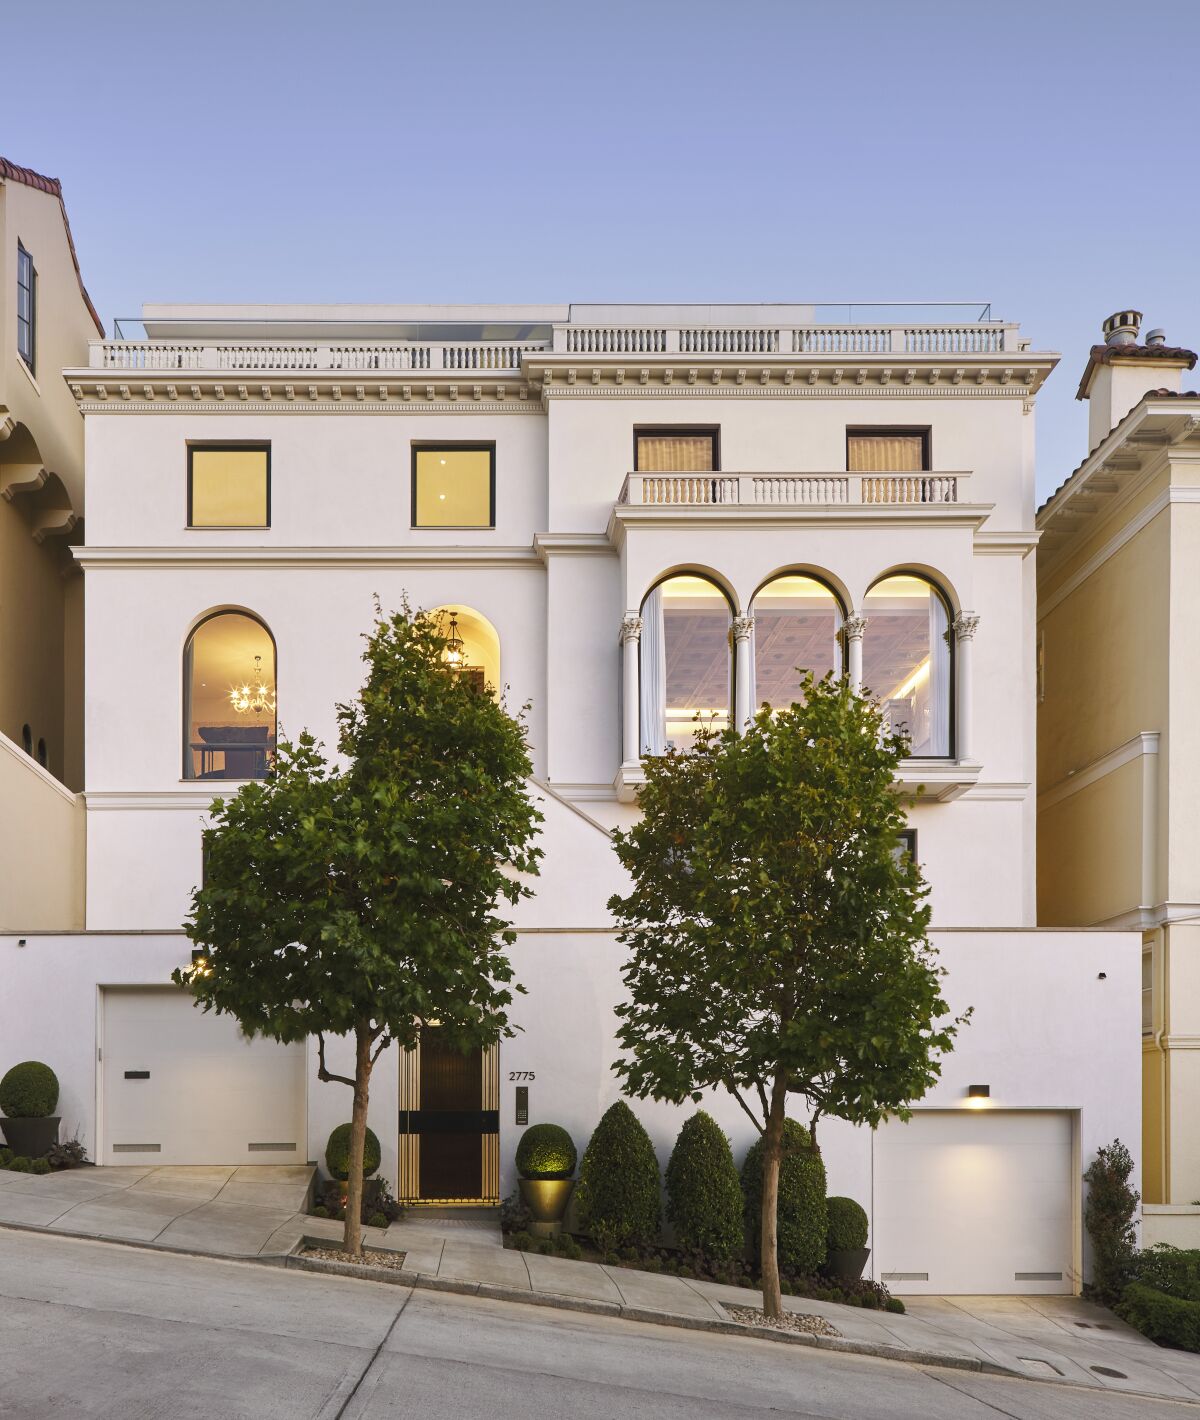 Built in 1916, the five-story home takes in views of the Bay and Golden Gate Bridge.